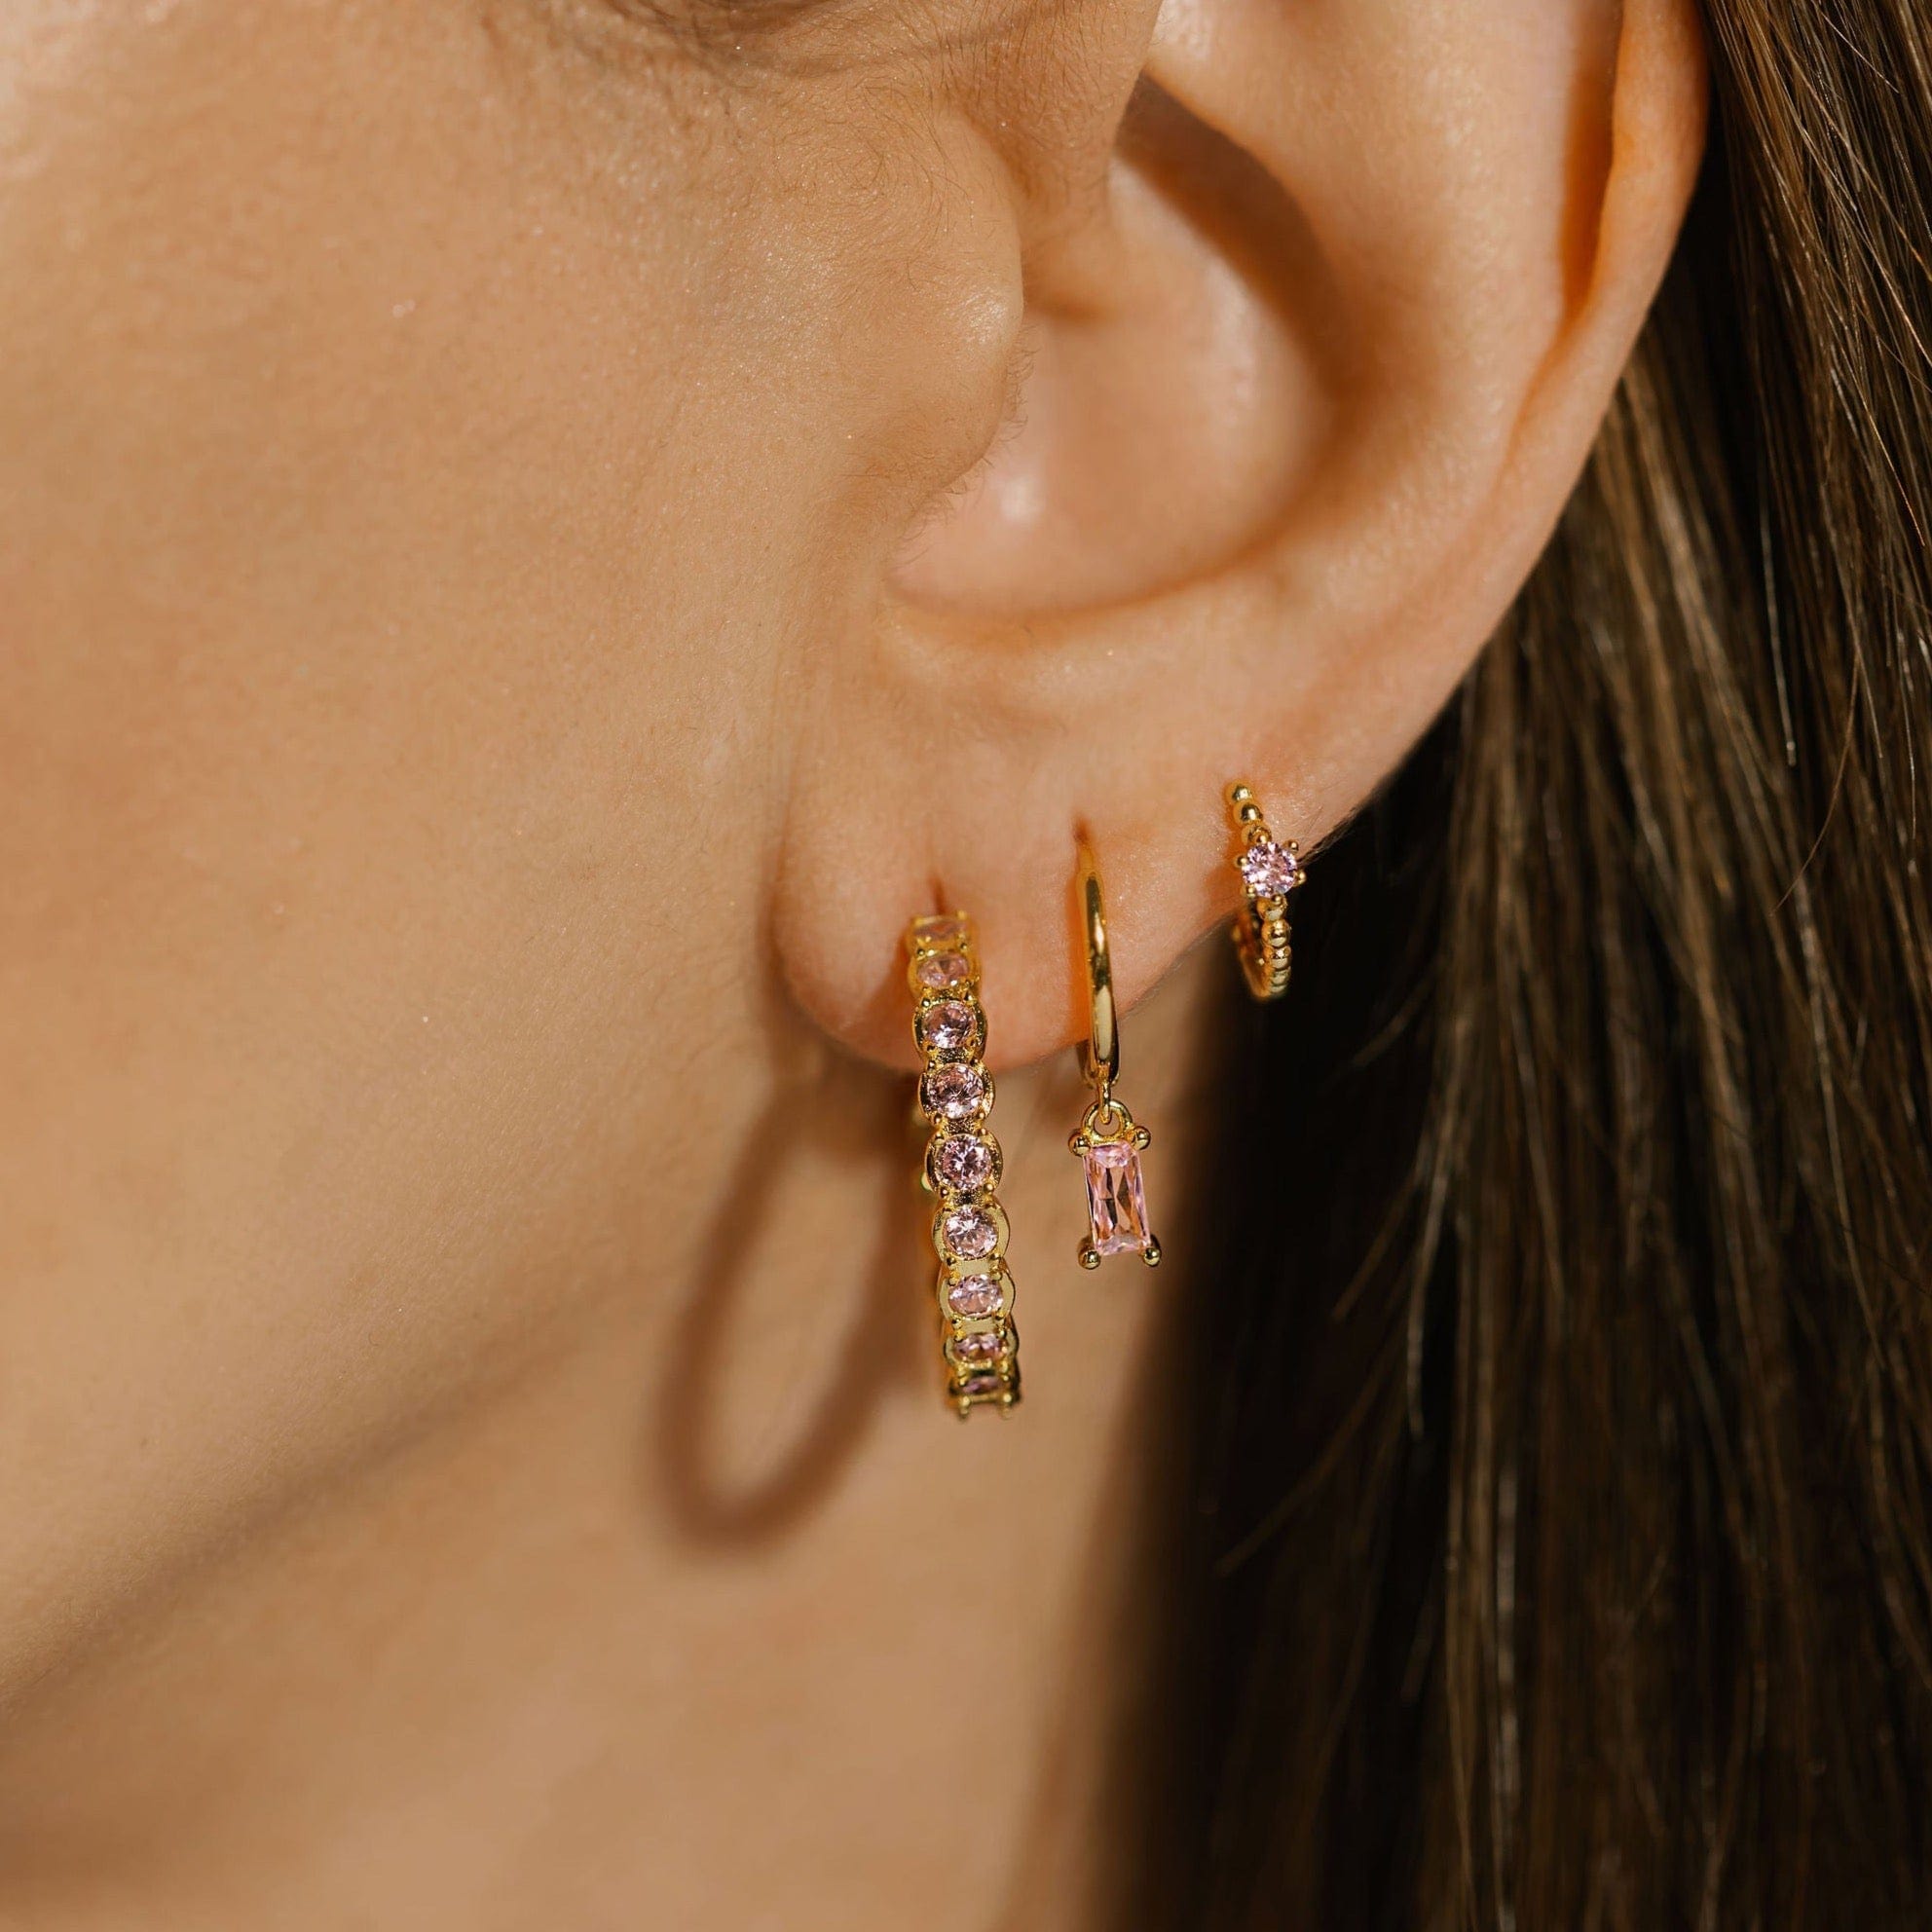  A close-up view shows the complete Bambina Hoop Trio earring set worn in a glamorous stack. The unique style and sparkling pink crystal accents give this elegant trio a quirky touch. 